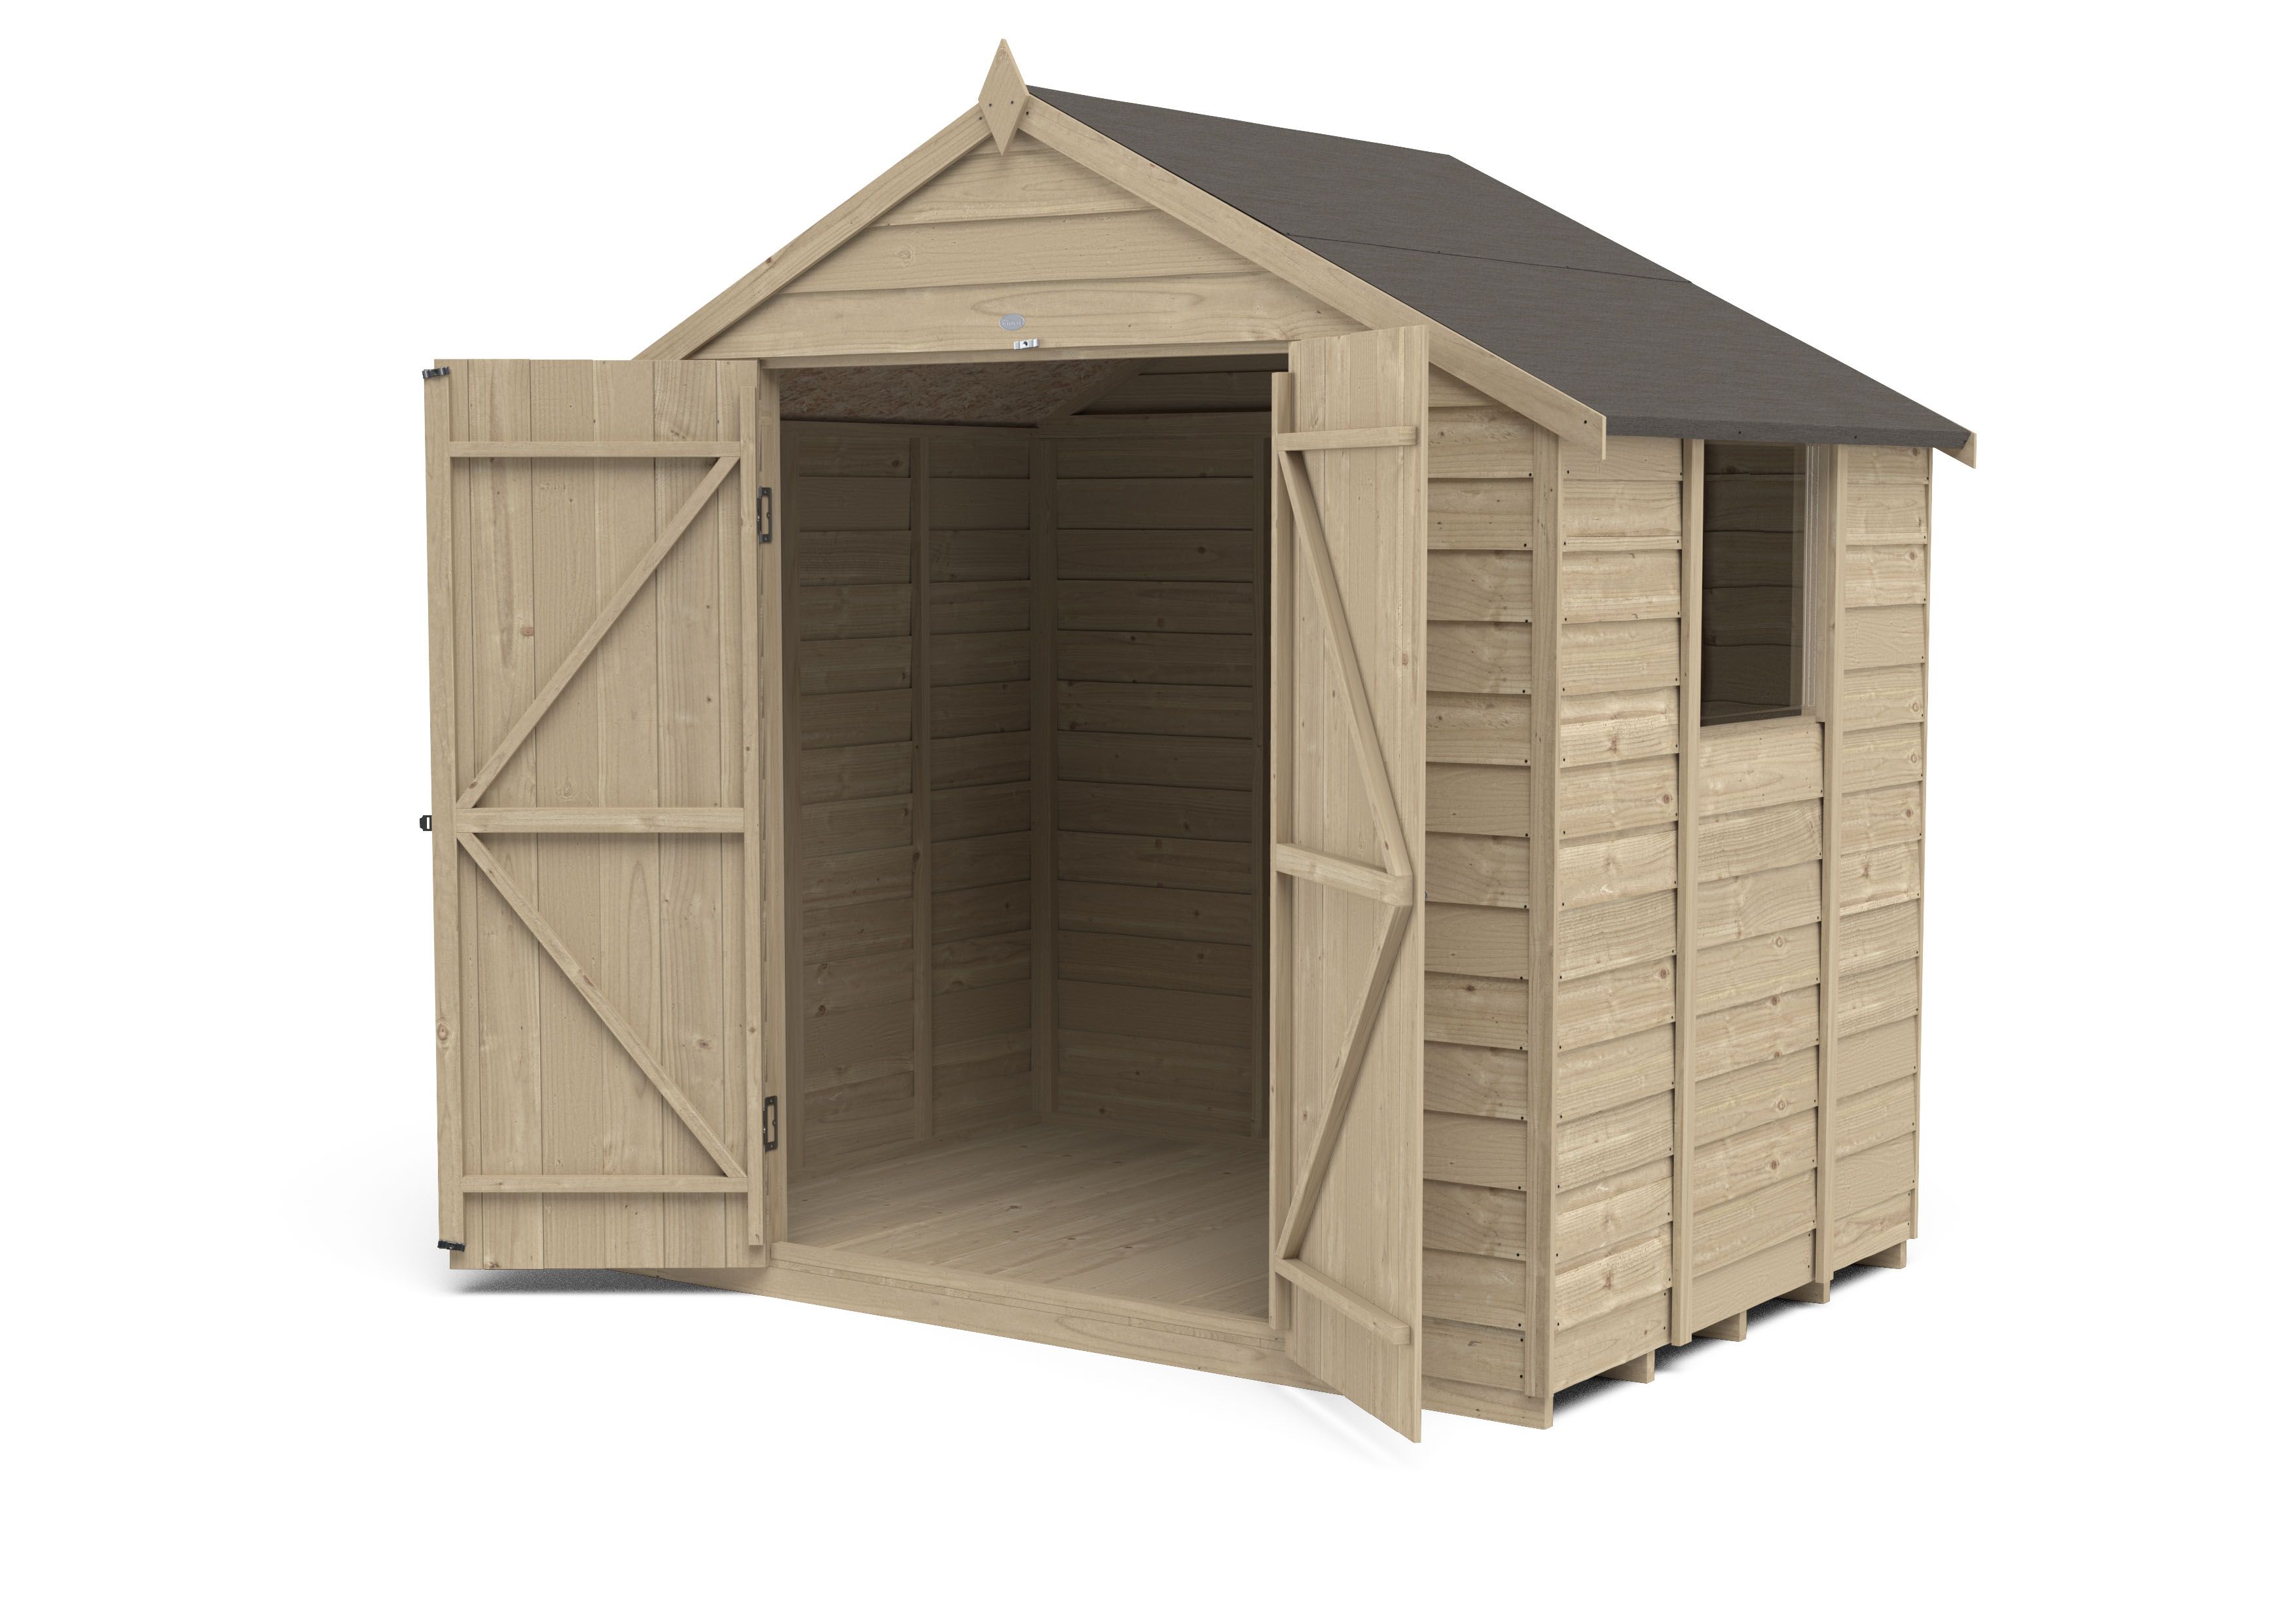 Forest Garden Overlap 7x5 ft Apex Wooden Pressure treated 2 door Shed with floor & 1 window - Assembly service included